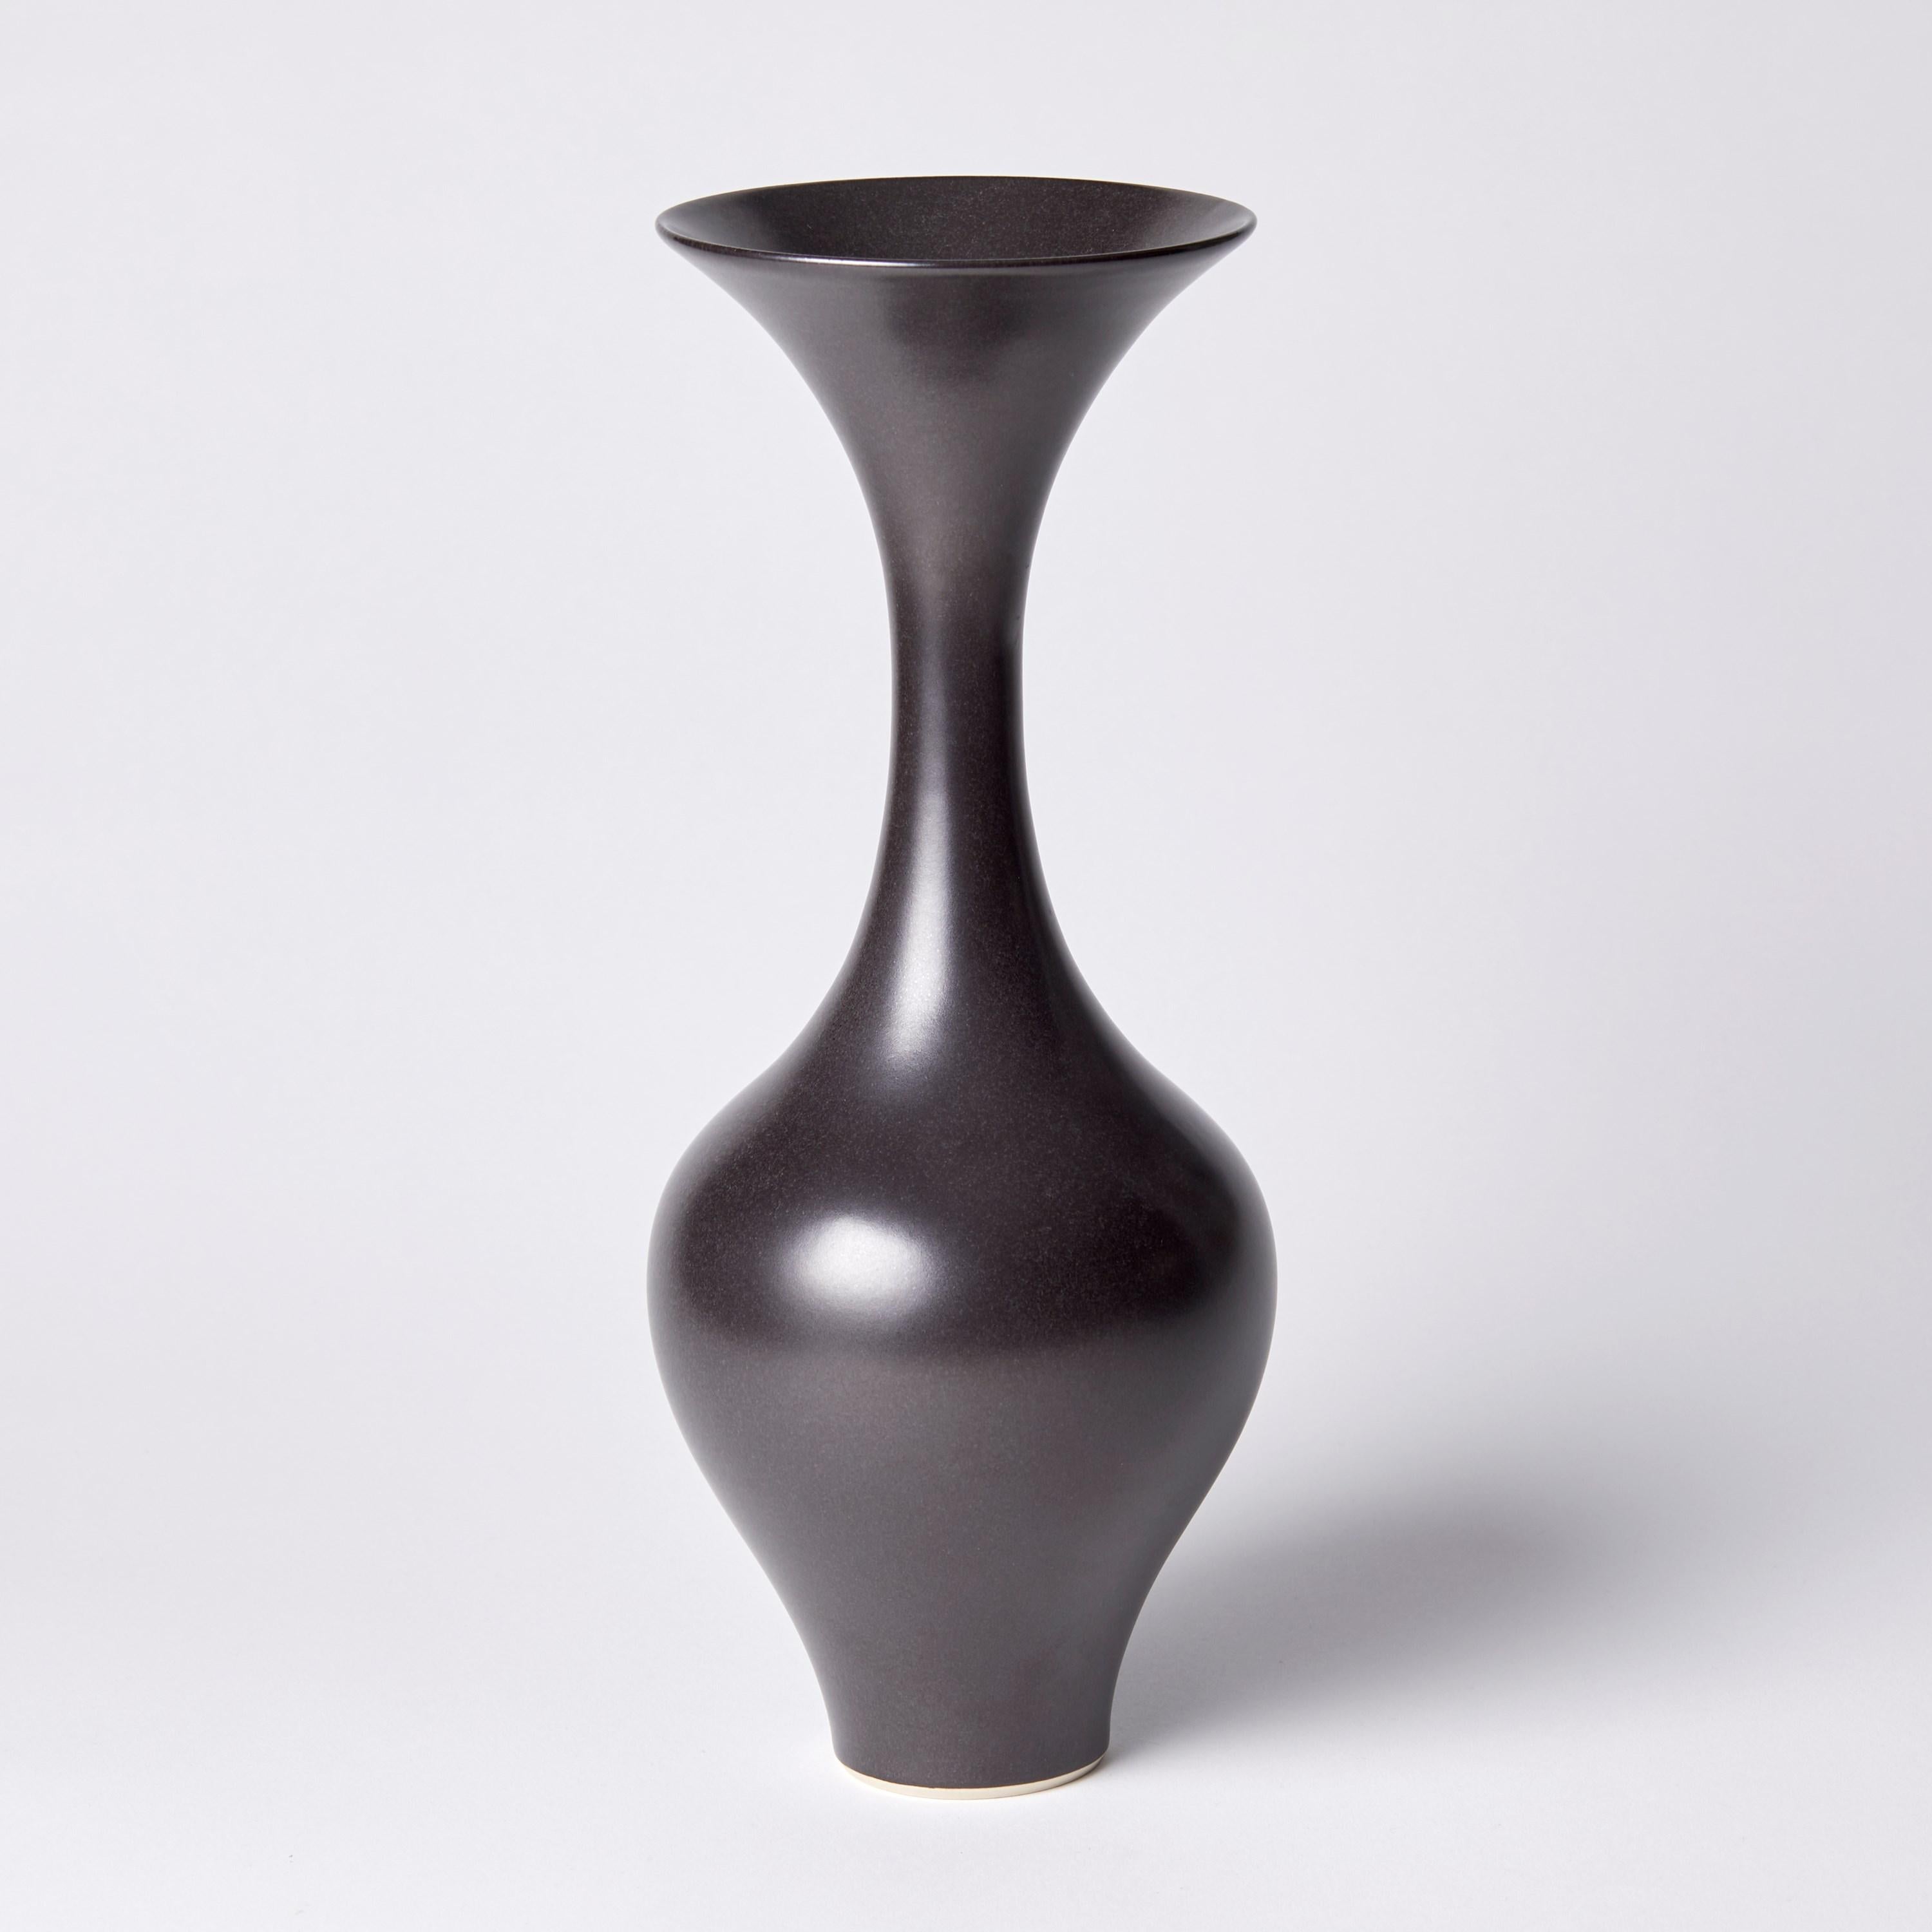 ‘Black classic vase II’ is a unique porcelain sculptural vessel by the British artist, Vivienne Foley, which has been released from her own personal archive of artworks. 

Vivienne Foley is based in Gloucestershire where she produces exquisite